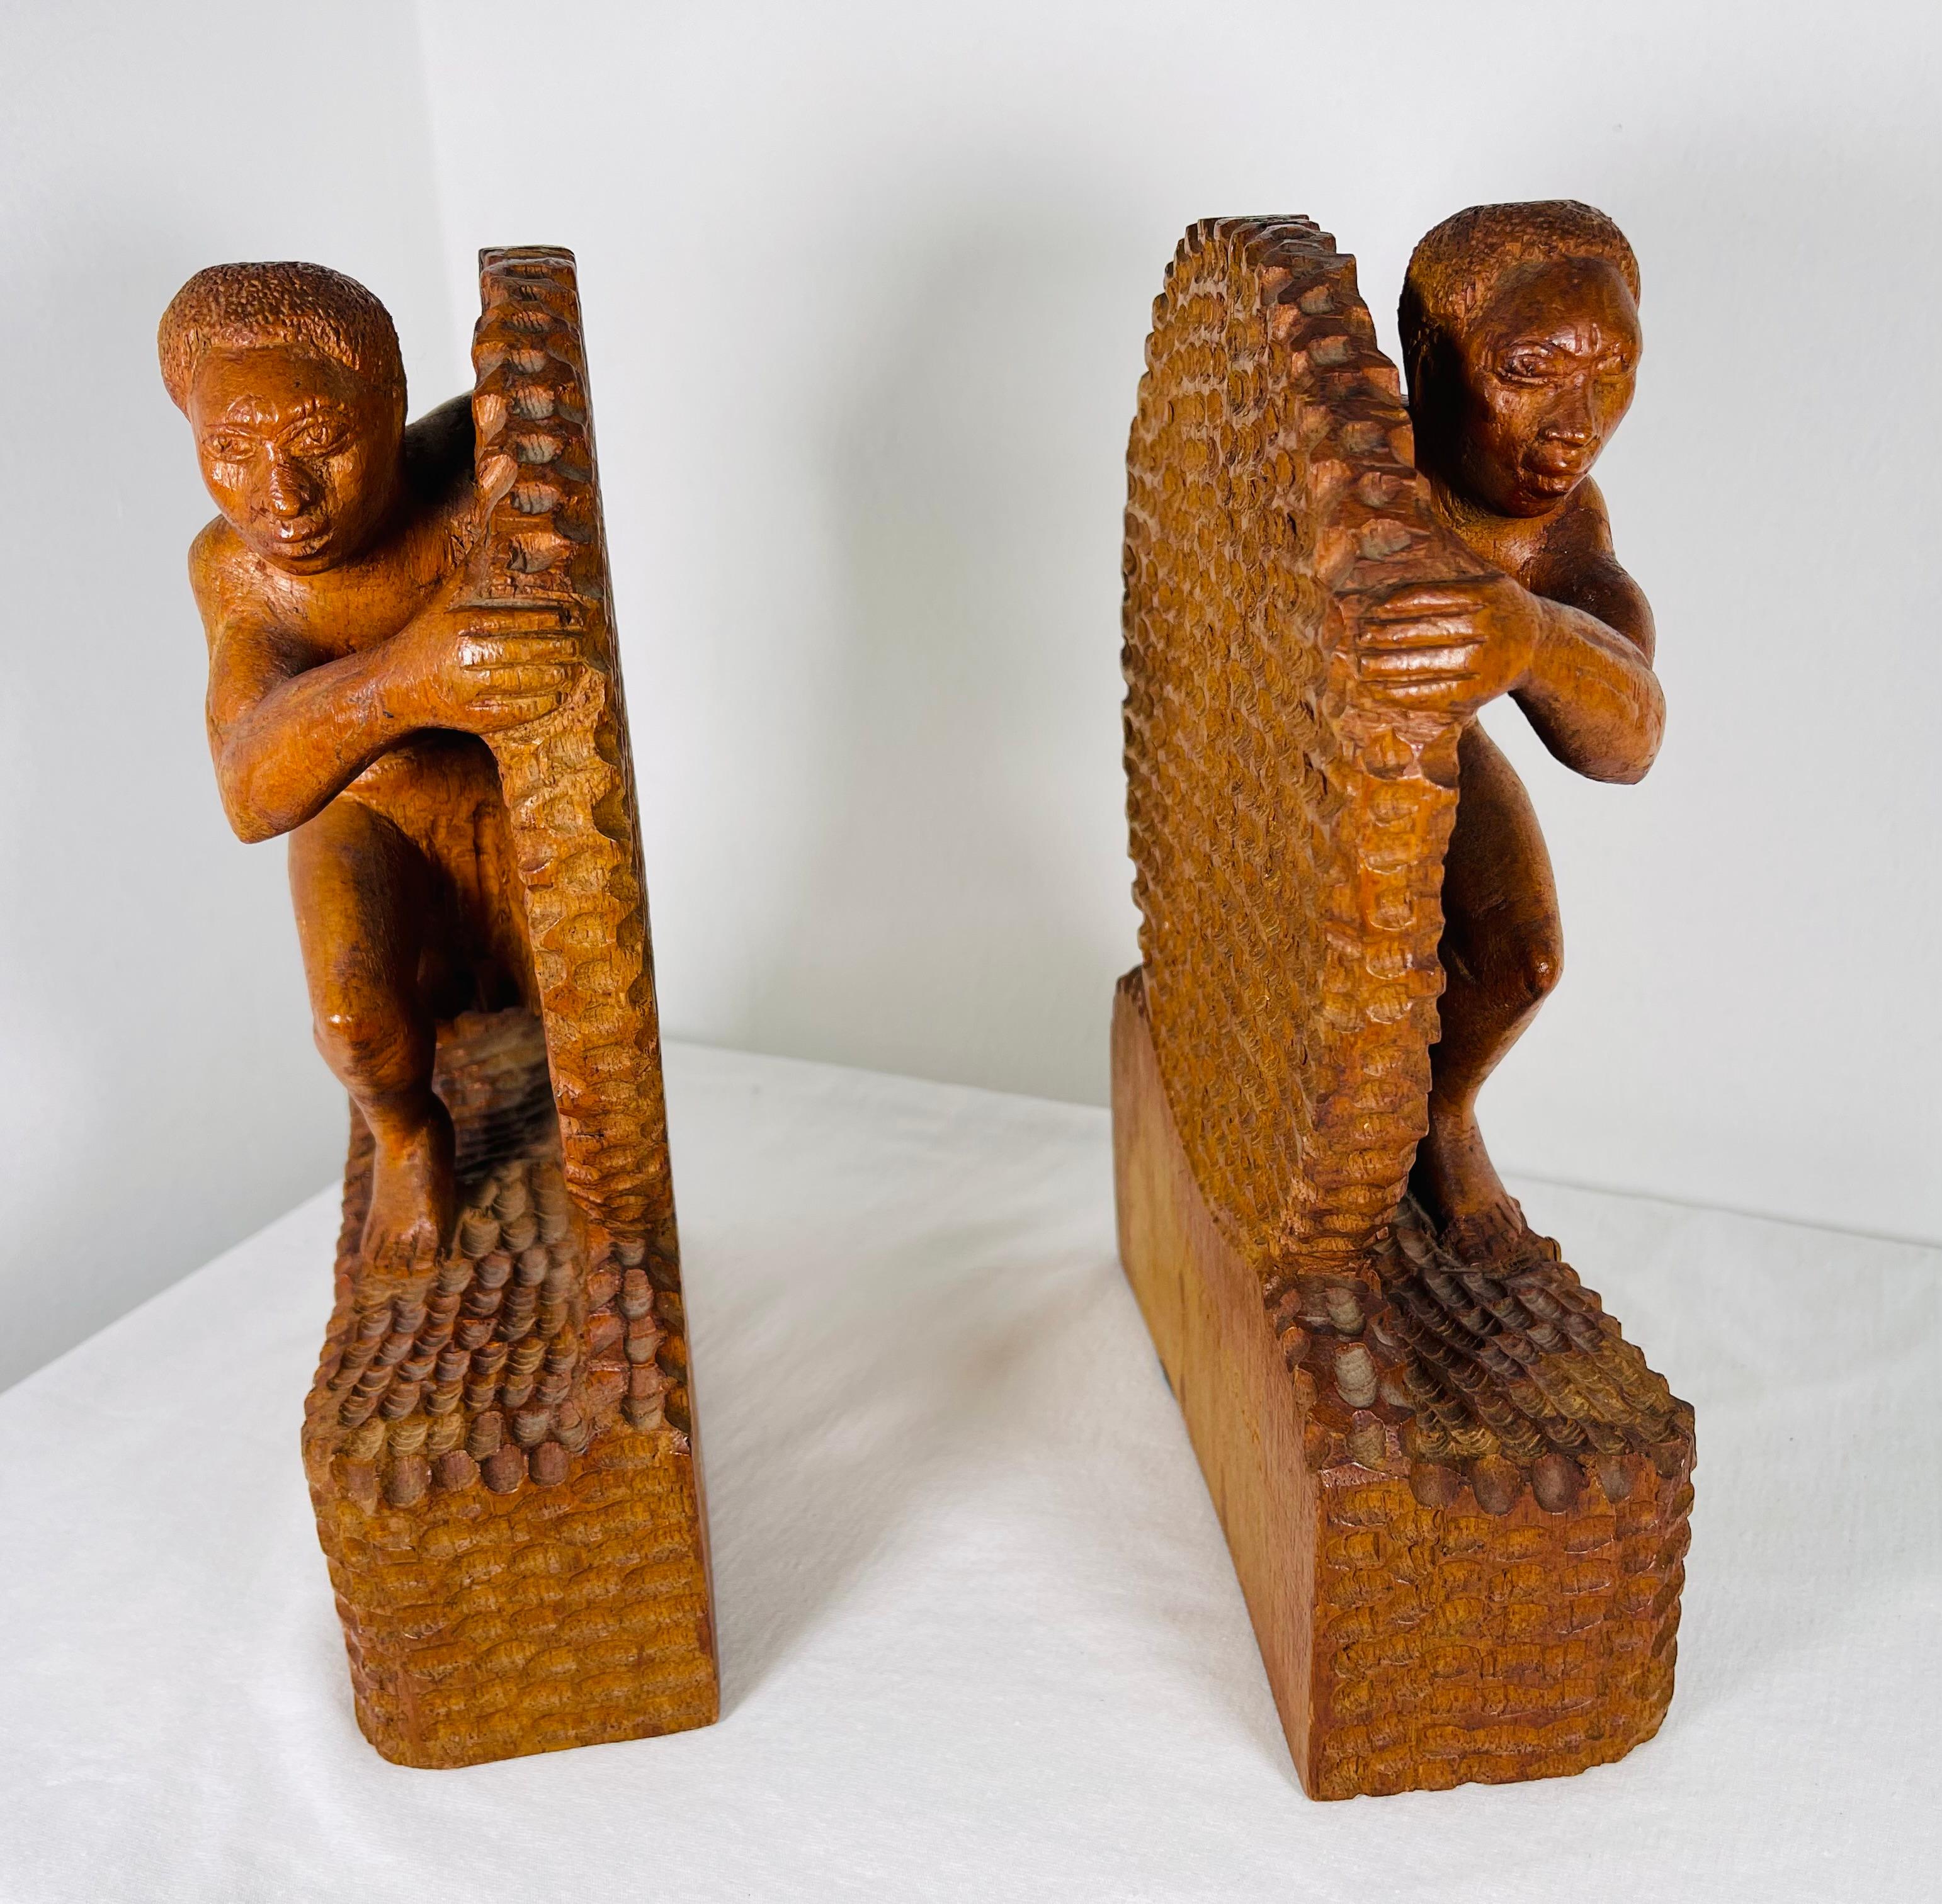 Art Deco period two greenhouse delivered carved in original rosewood signed B Ralisam
The sculpture represents two men almost naked in the effort of the work. They push a wheel with foot support. The characters' muscles are detailed, underlining